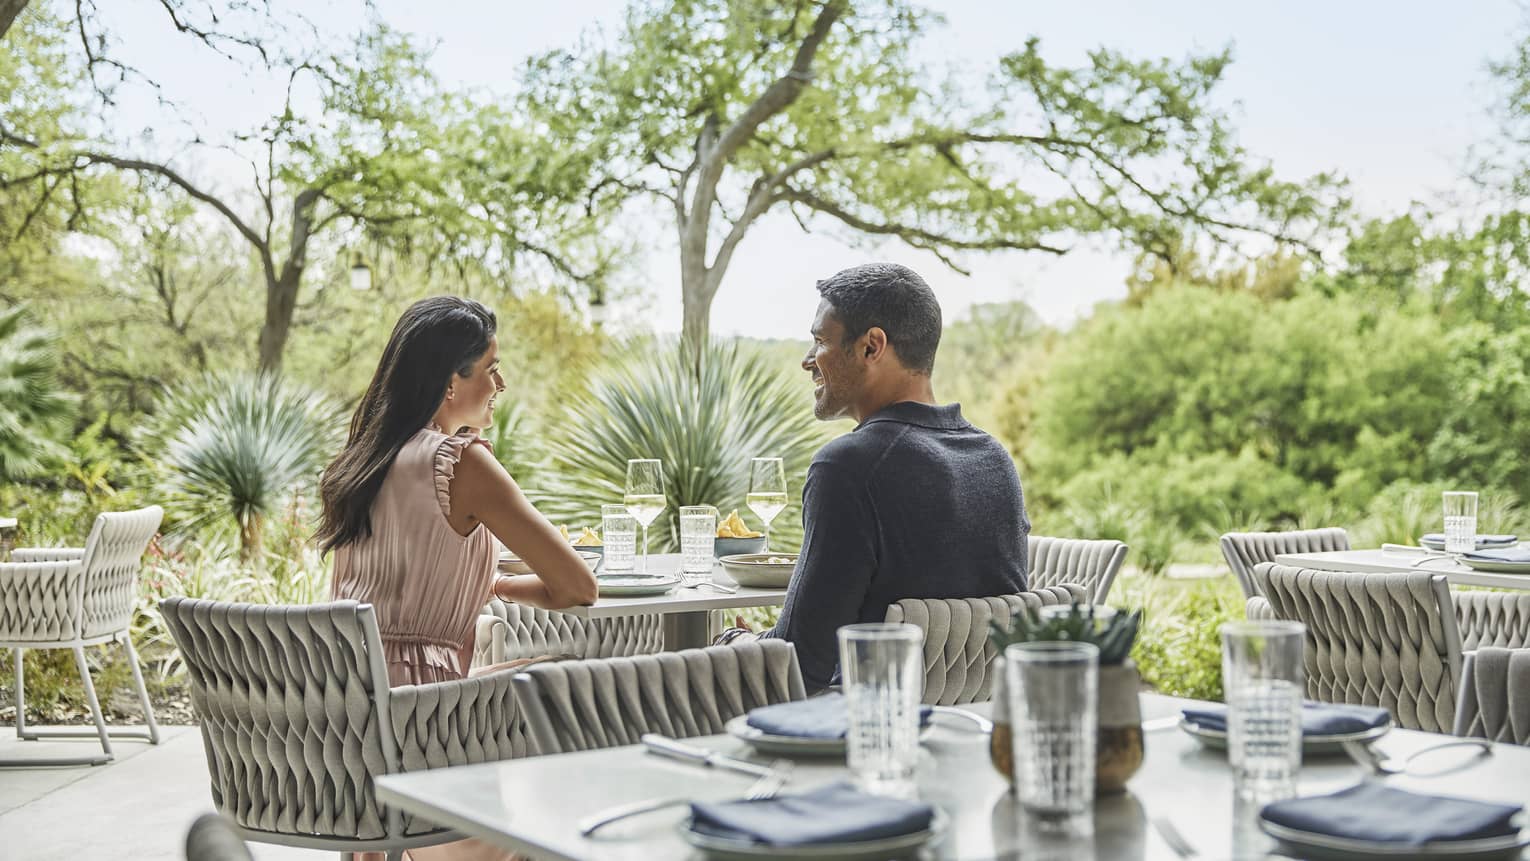 A couple shares a romantic meal on the outdoor terrace at Ciclo.